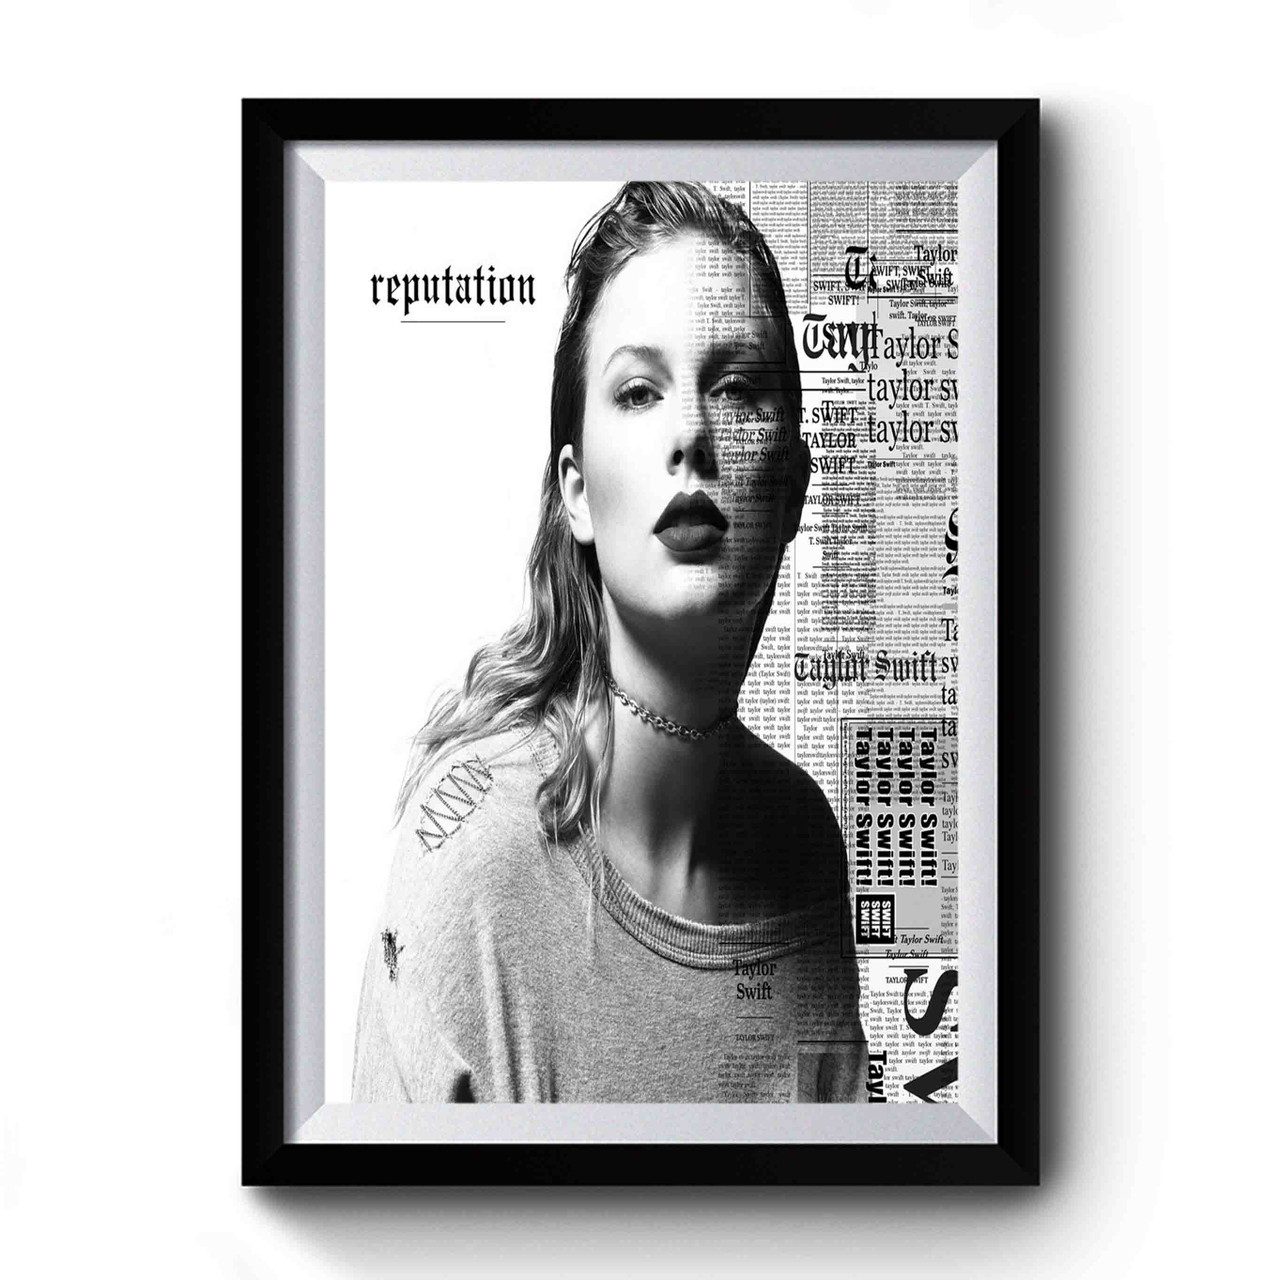 End Game- Reputation Taylor Swift | Poster